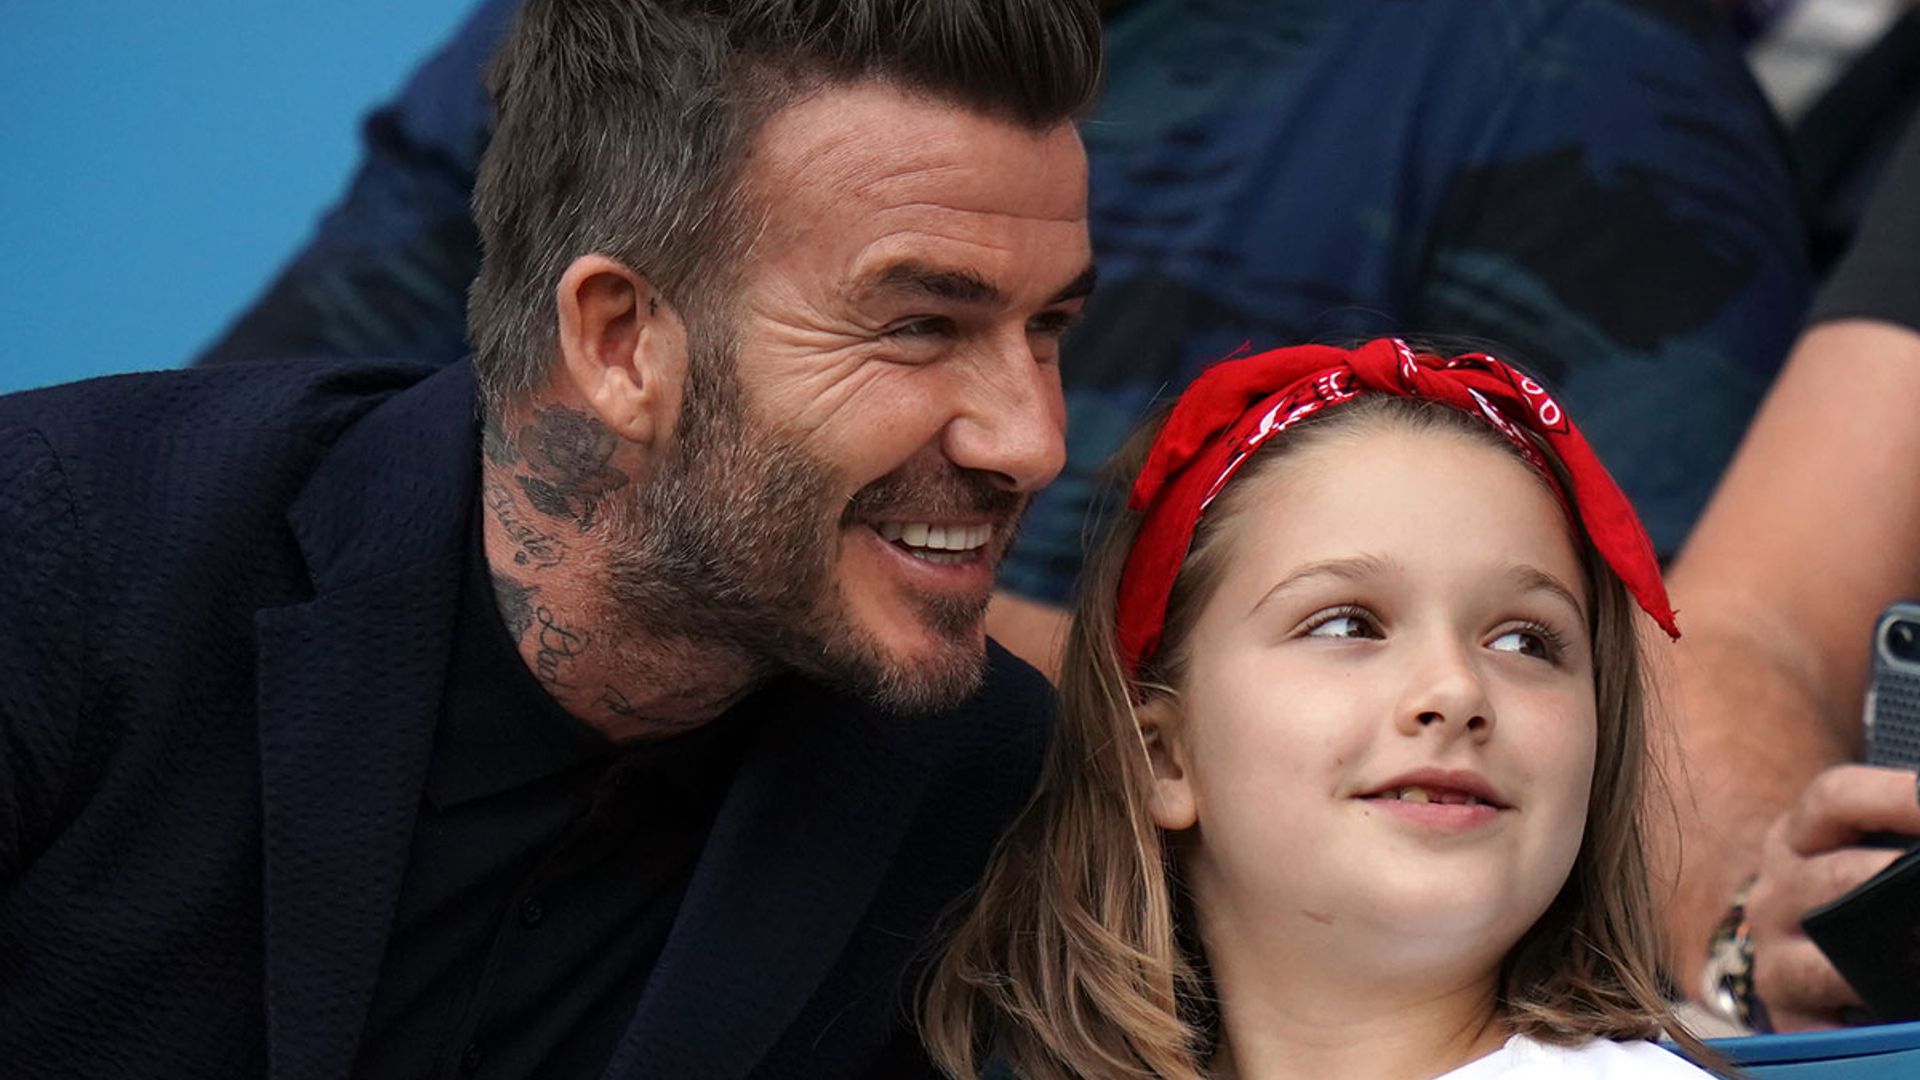 Harper Beckham is dad David's double with her brand new look